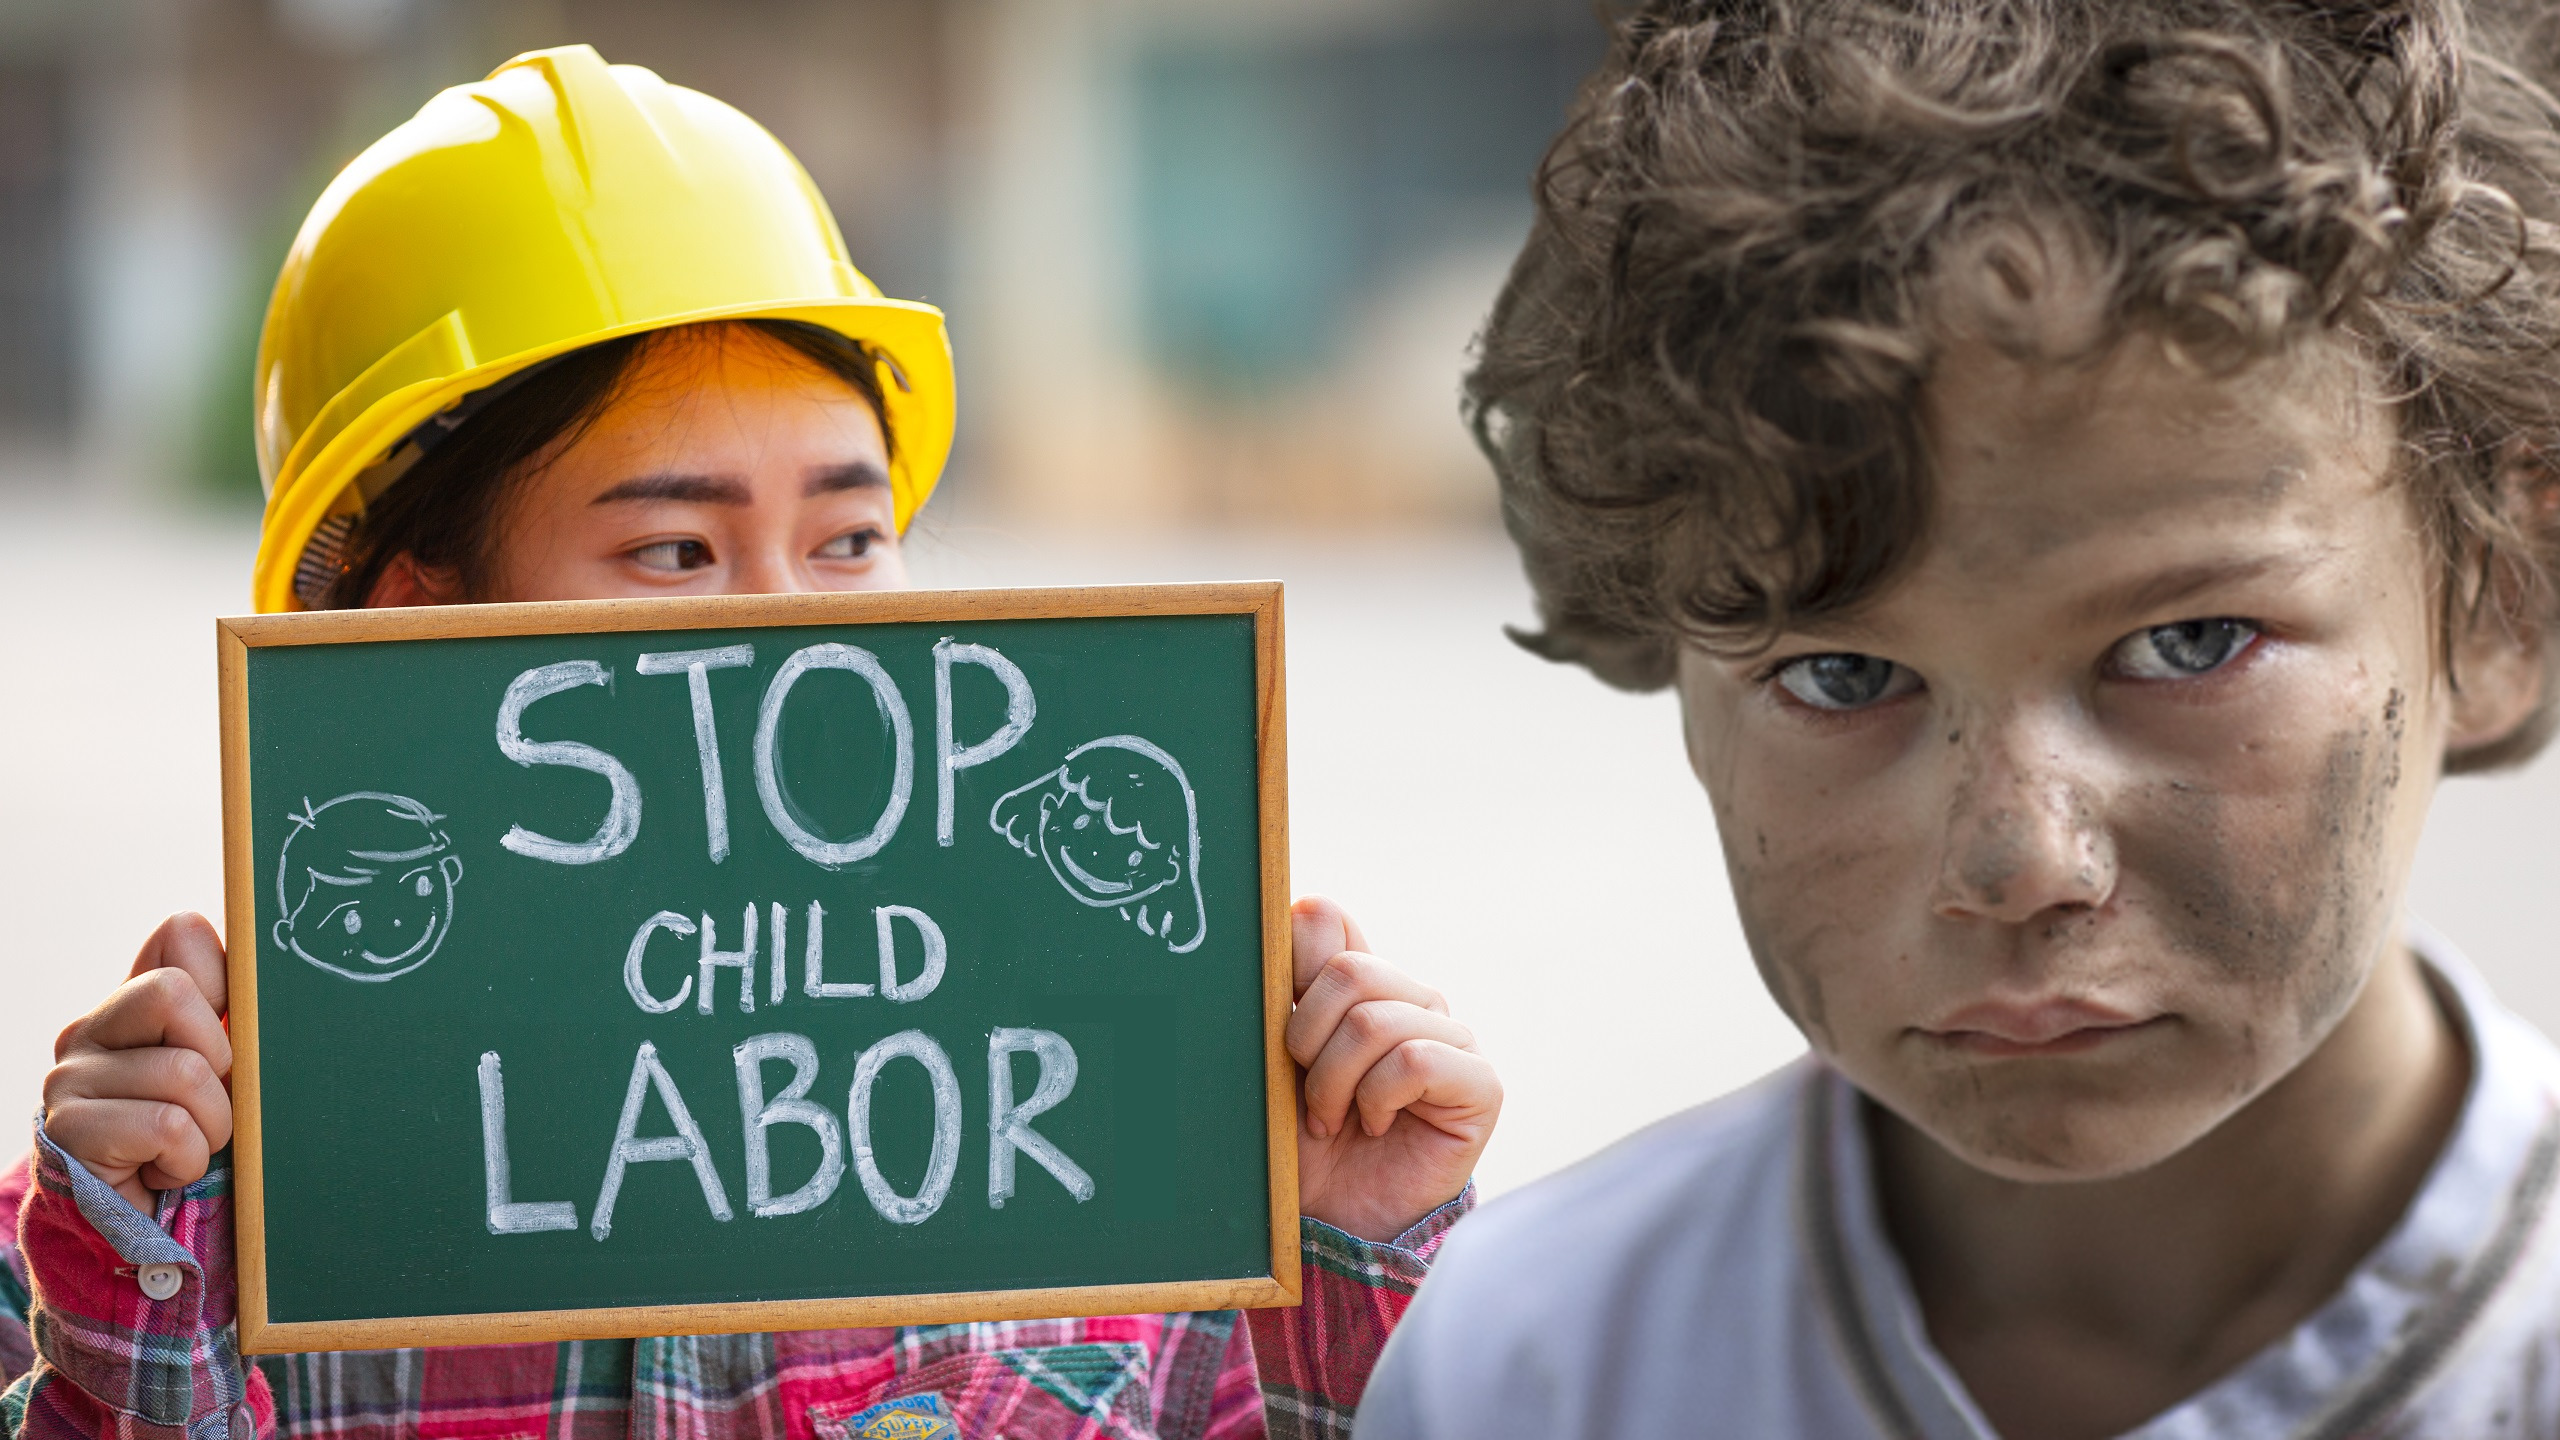 Lebanon’s Socioeconomic Crisis Forces 10% of Families To Rely on Child Labor: UNICEF